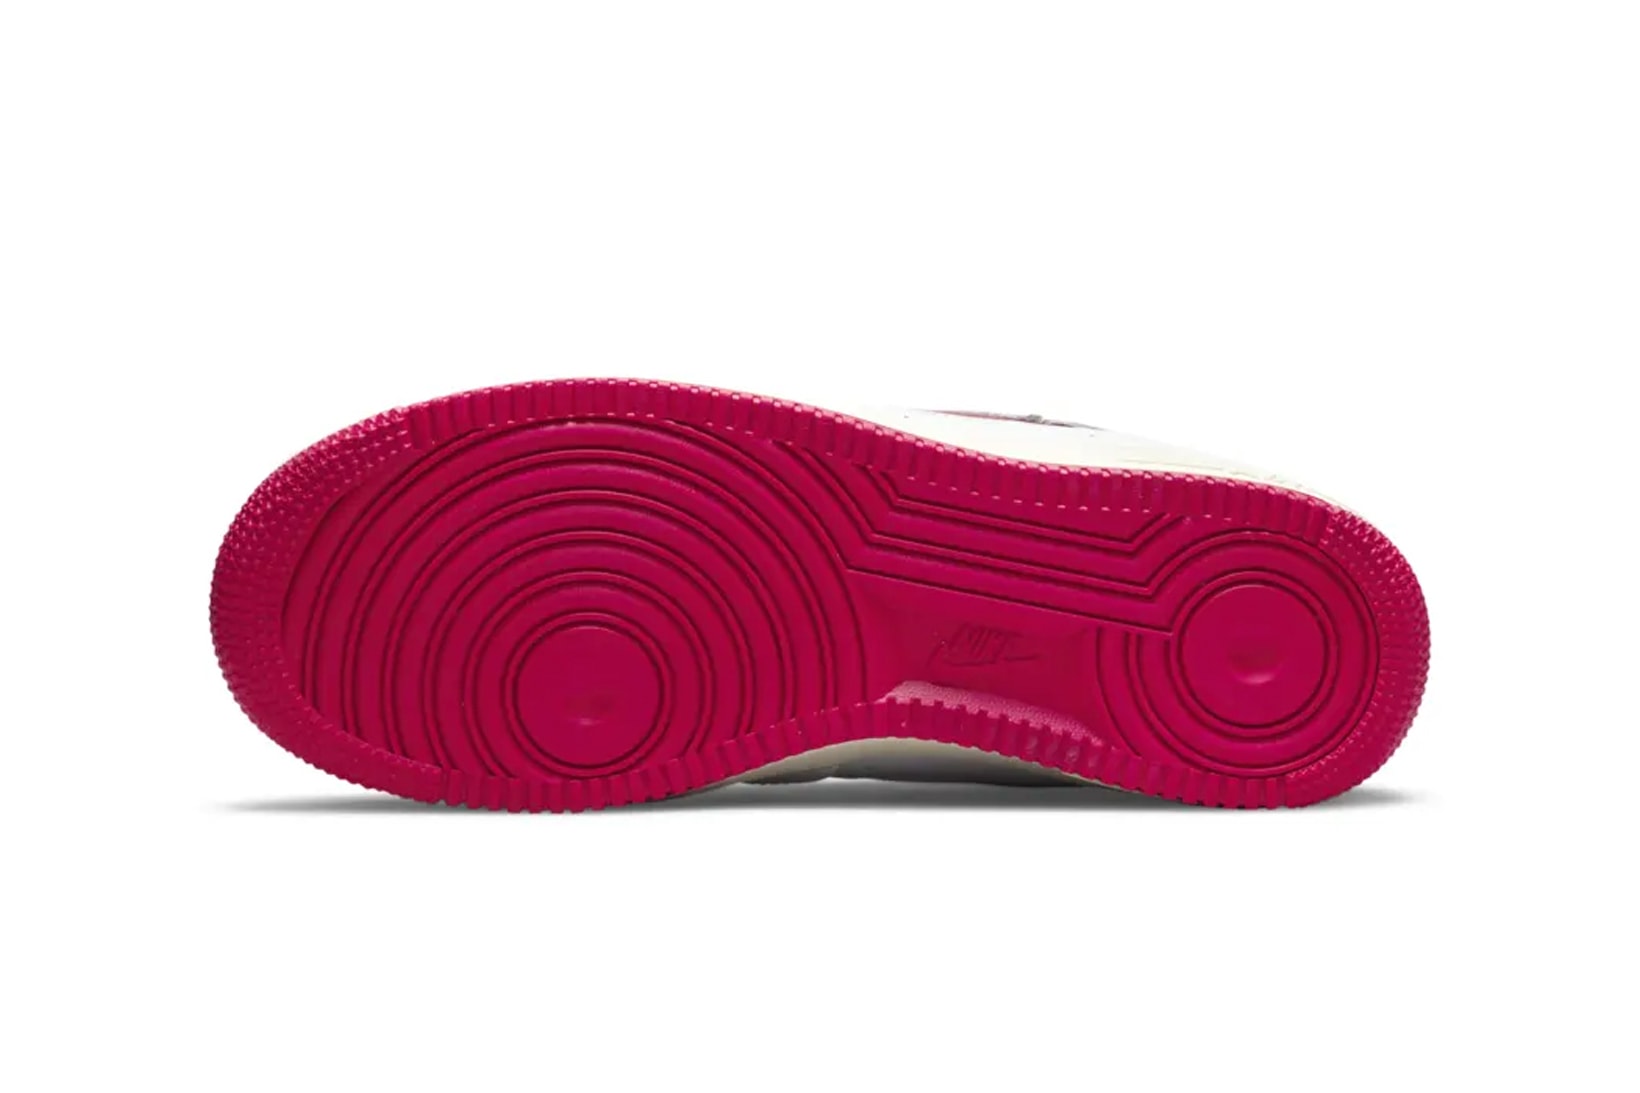 The sneaker's "Gym Red" soles